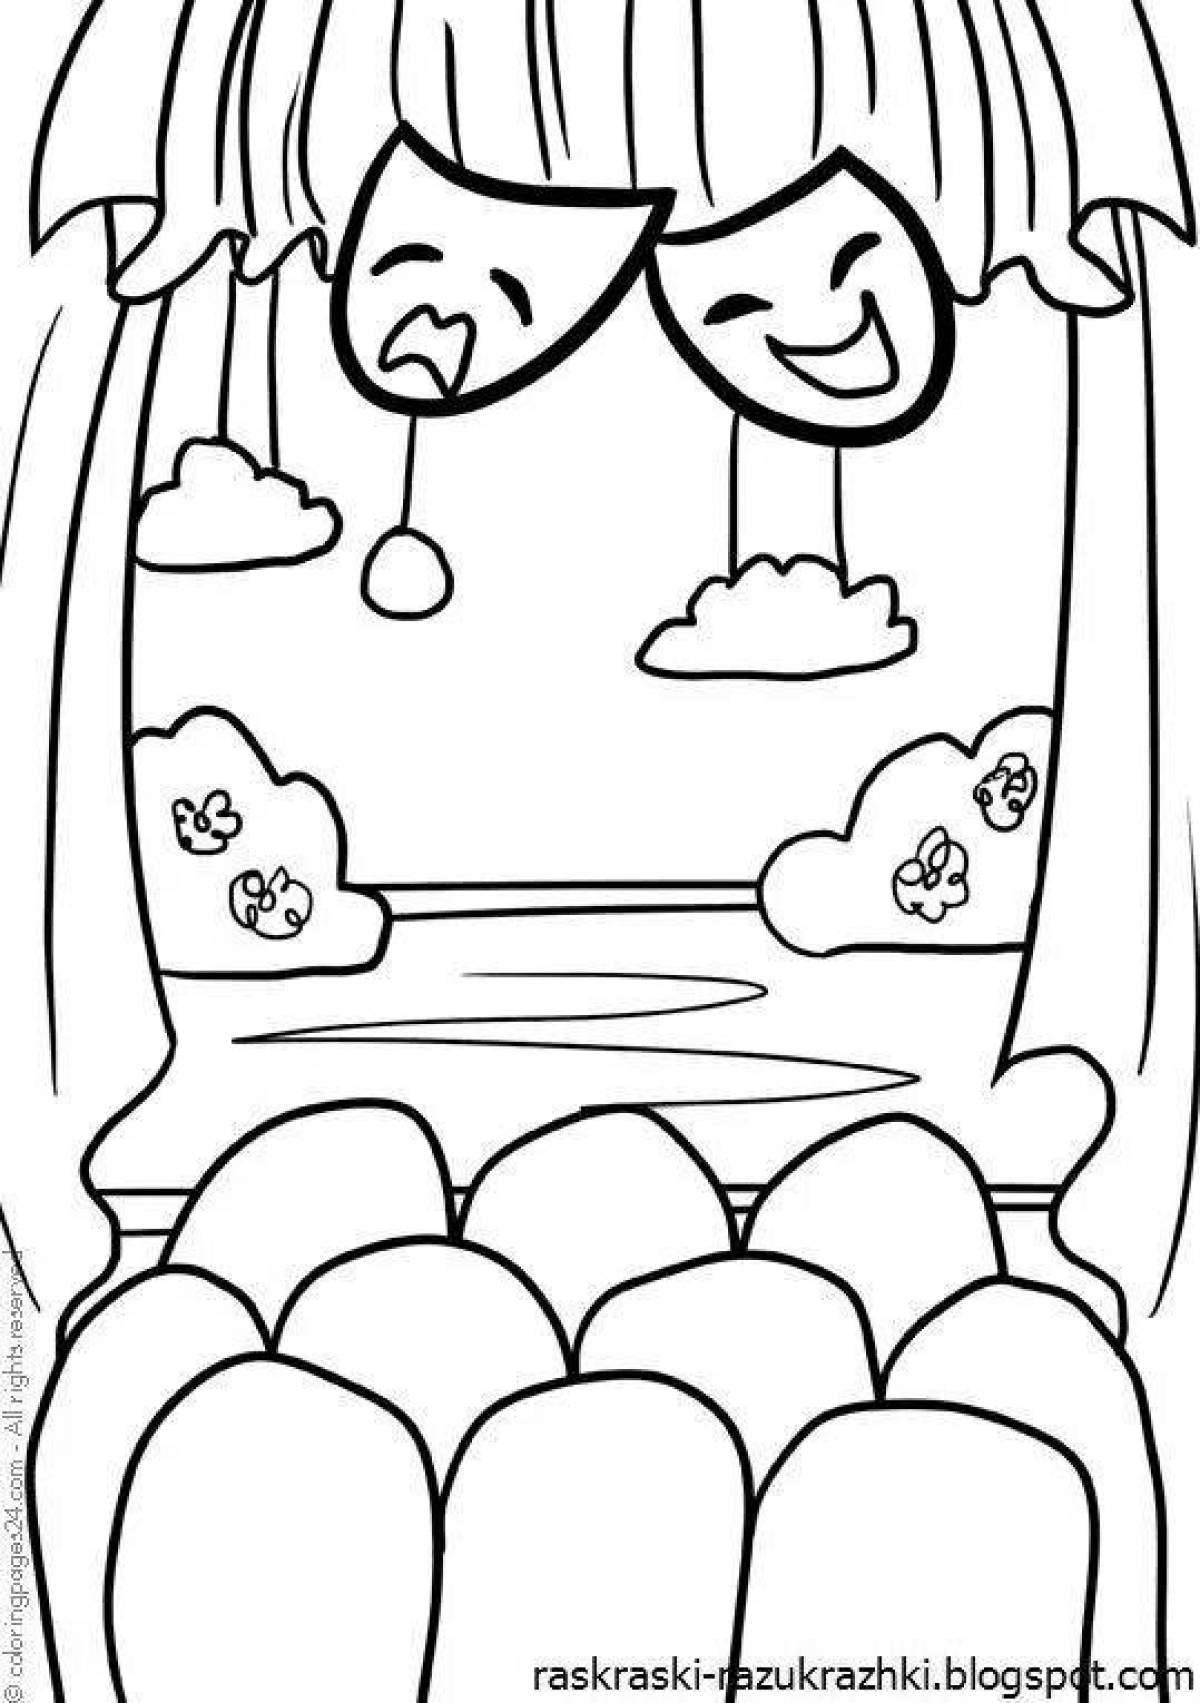 Imagination game coloring page